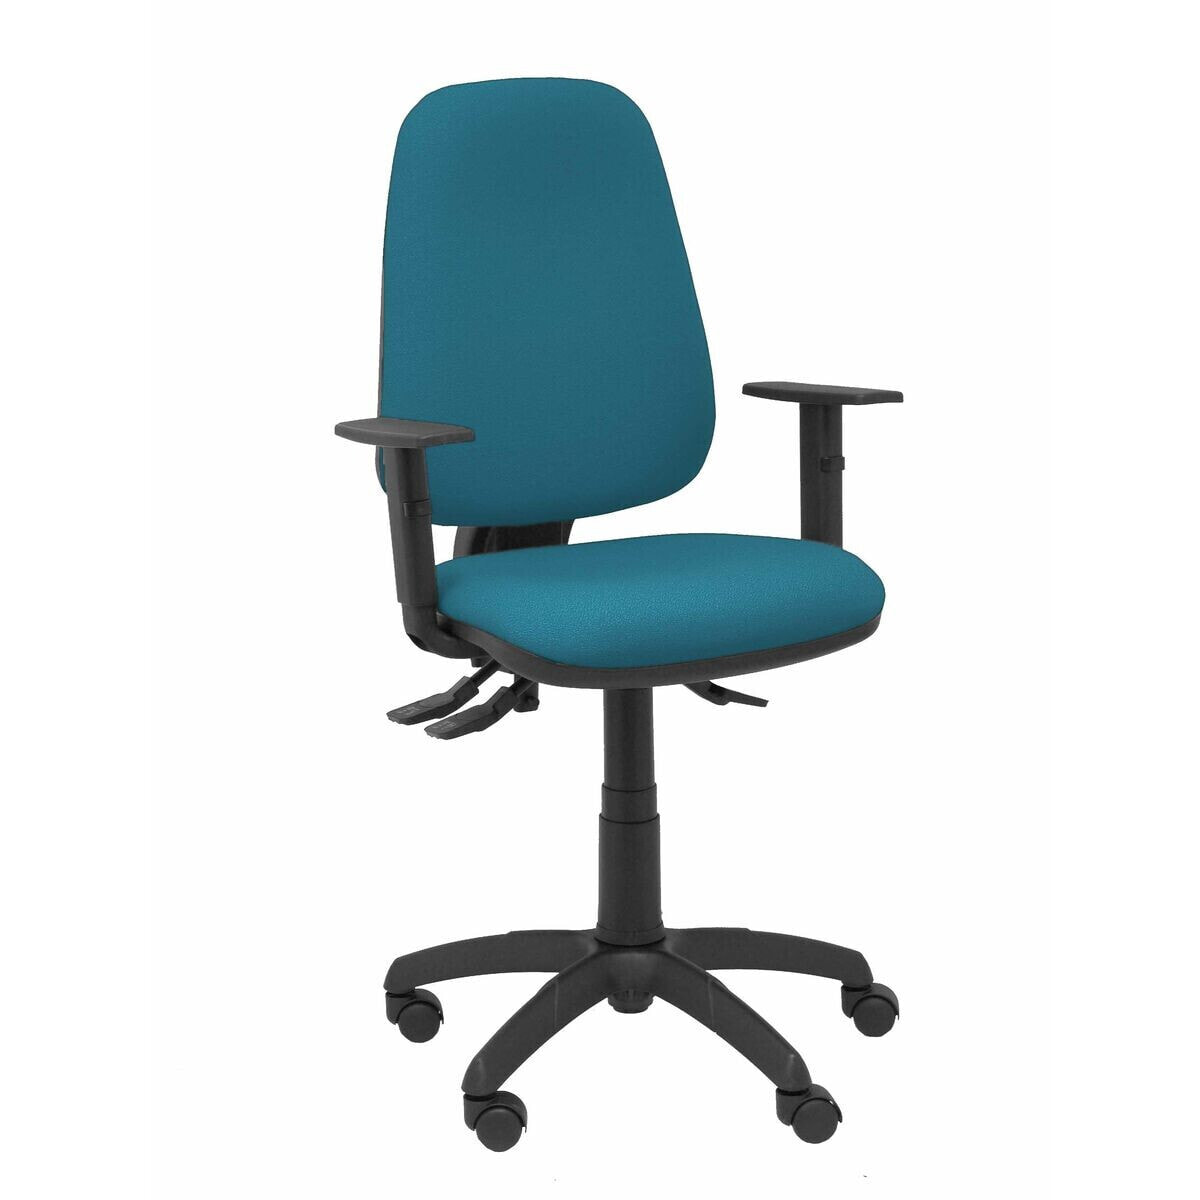 Office Chair Sierra S P&C I429B10 With armrests Green/Blue